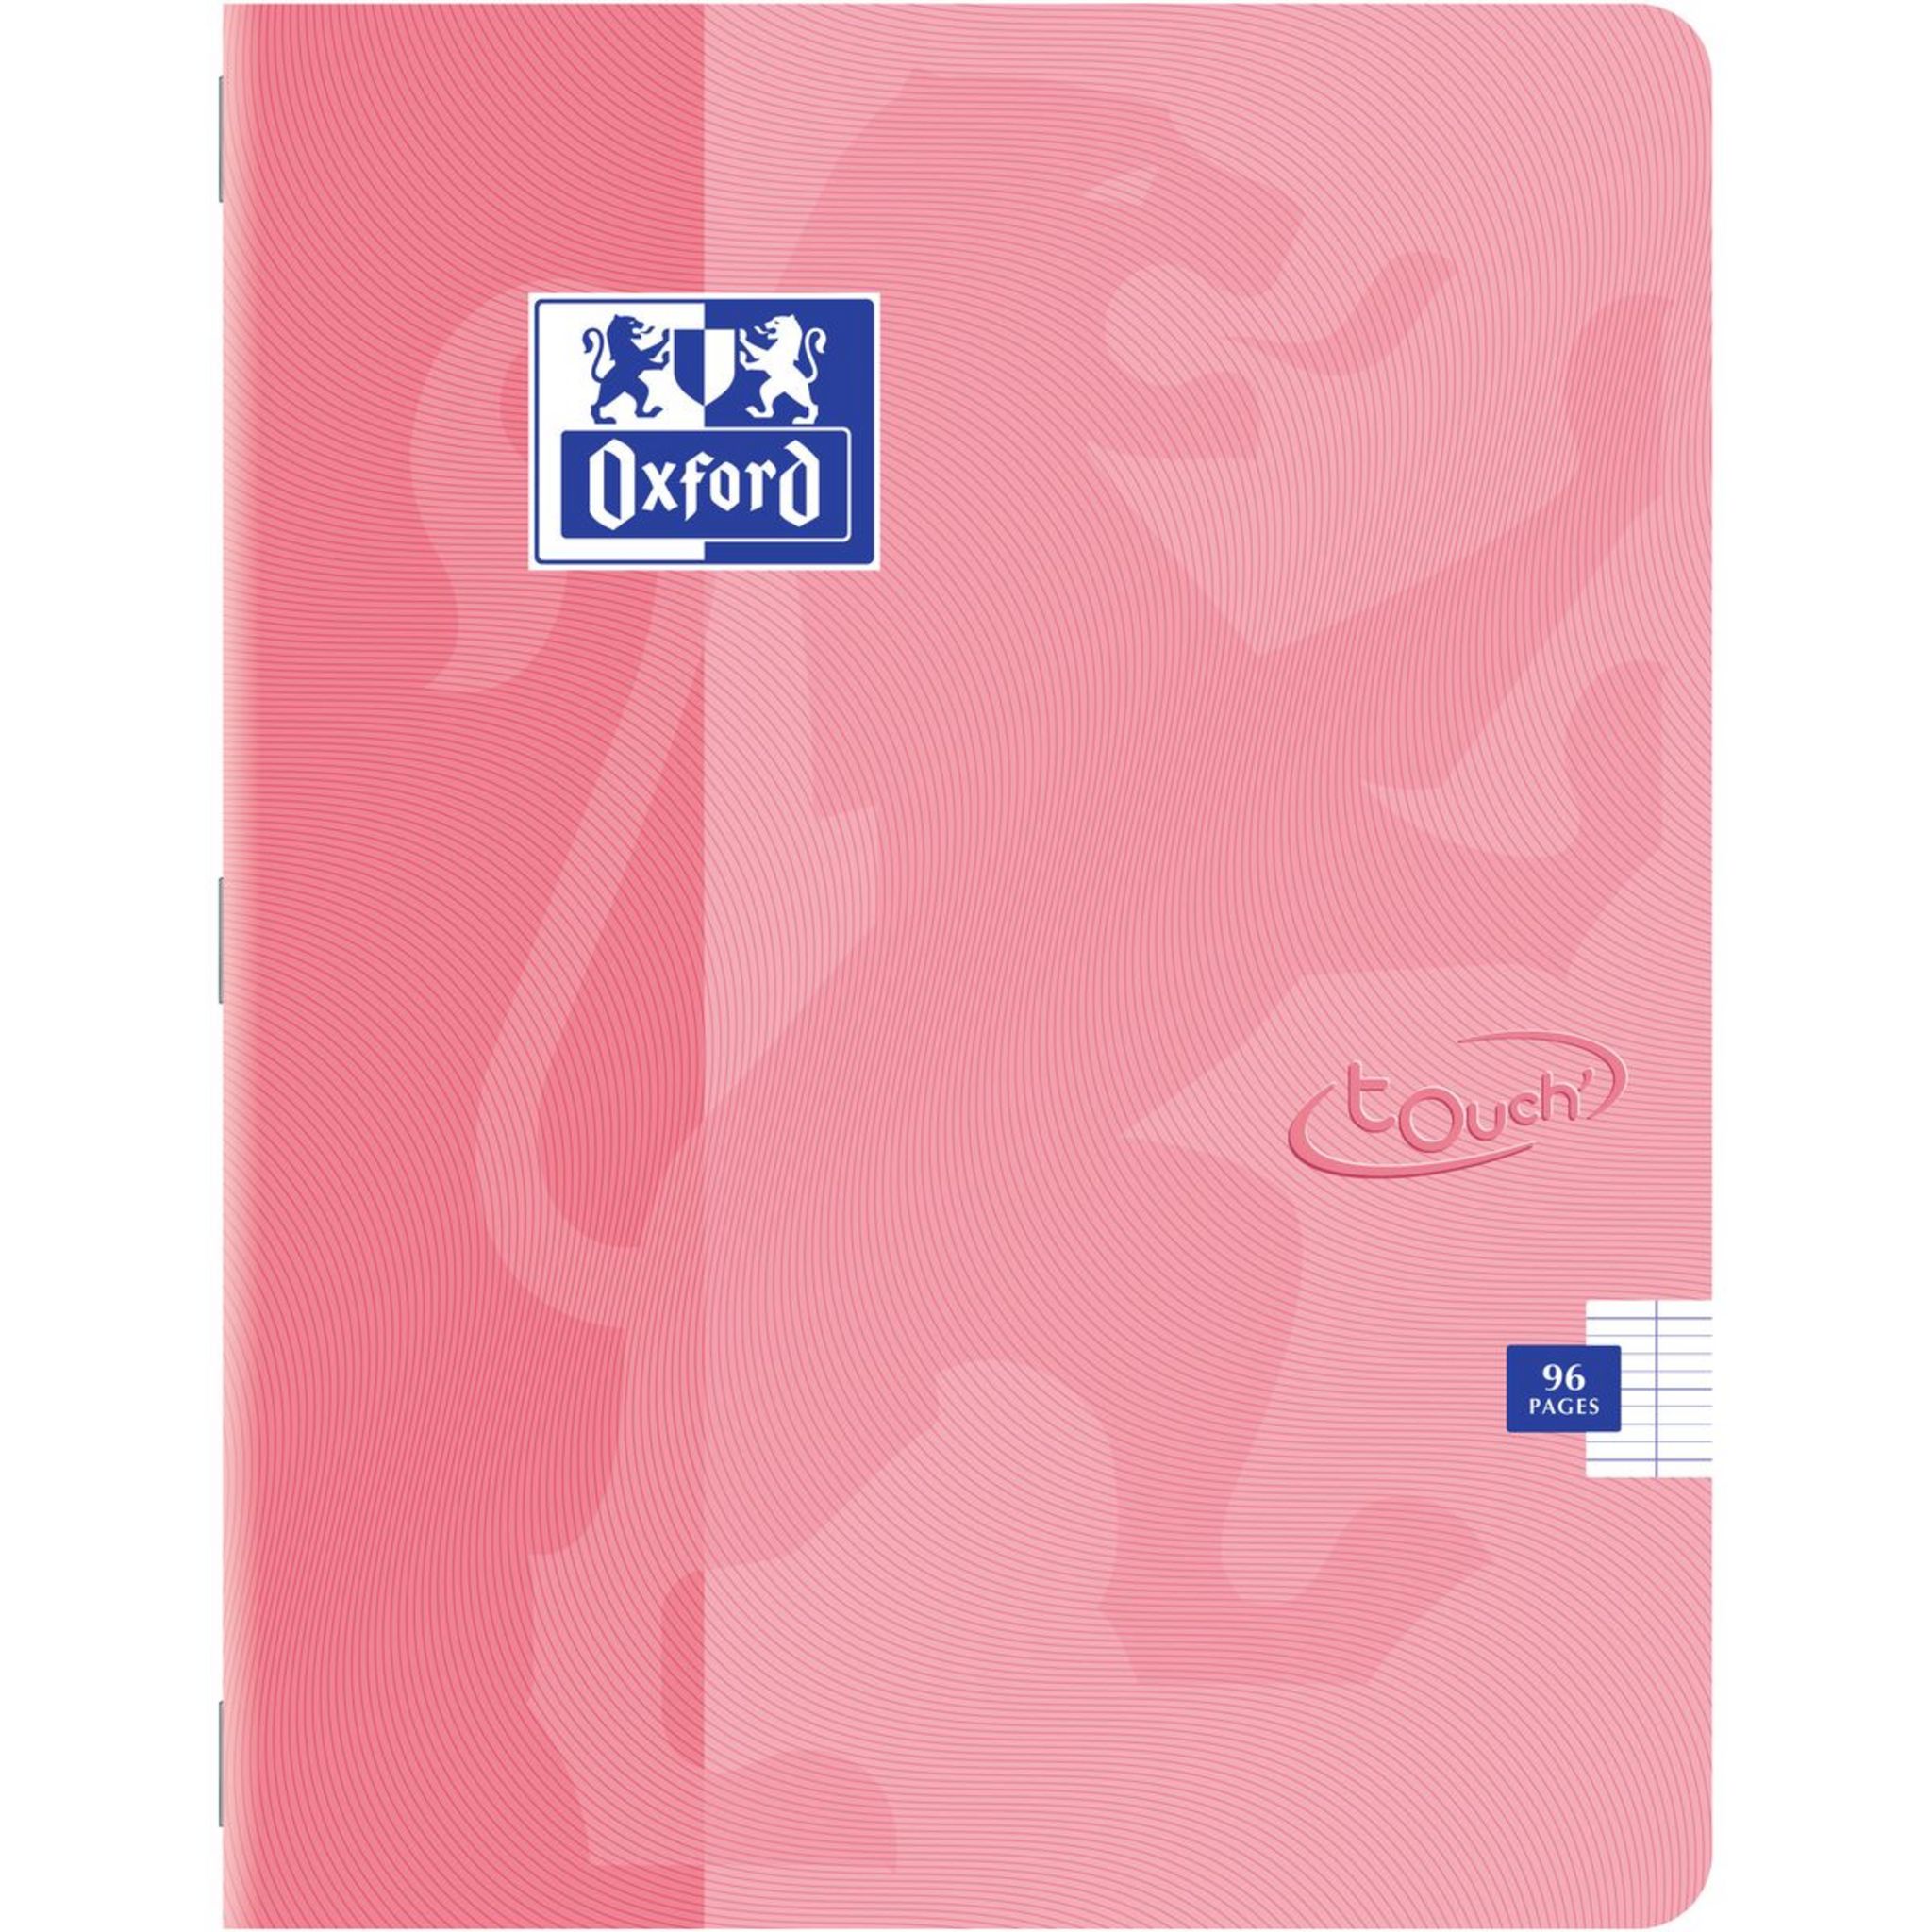 Cahier A4 Oxford Easybook 96 pages ligné pastel rose - Confetti Campus